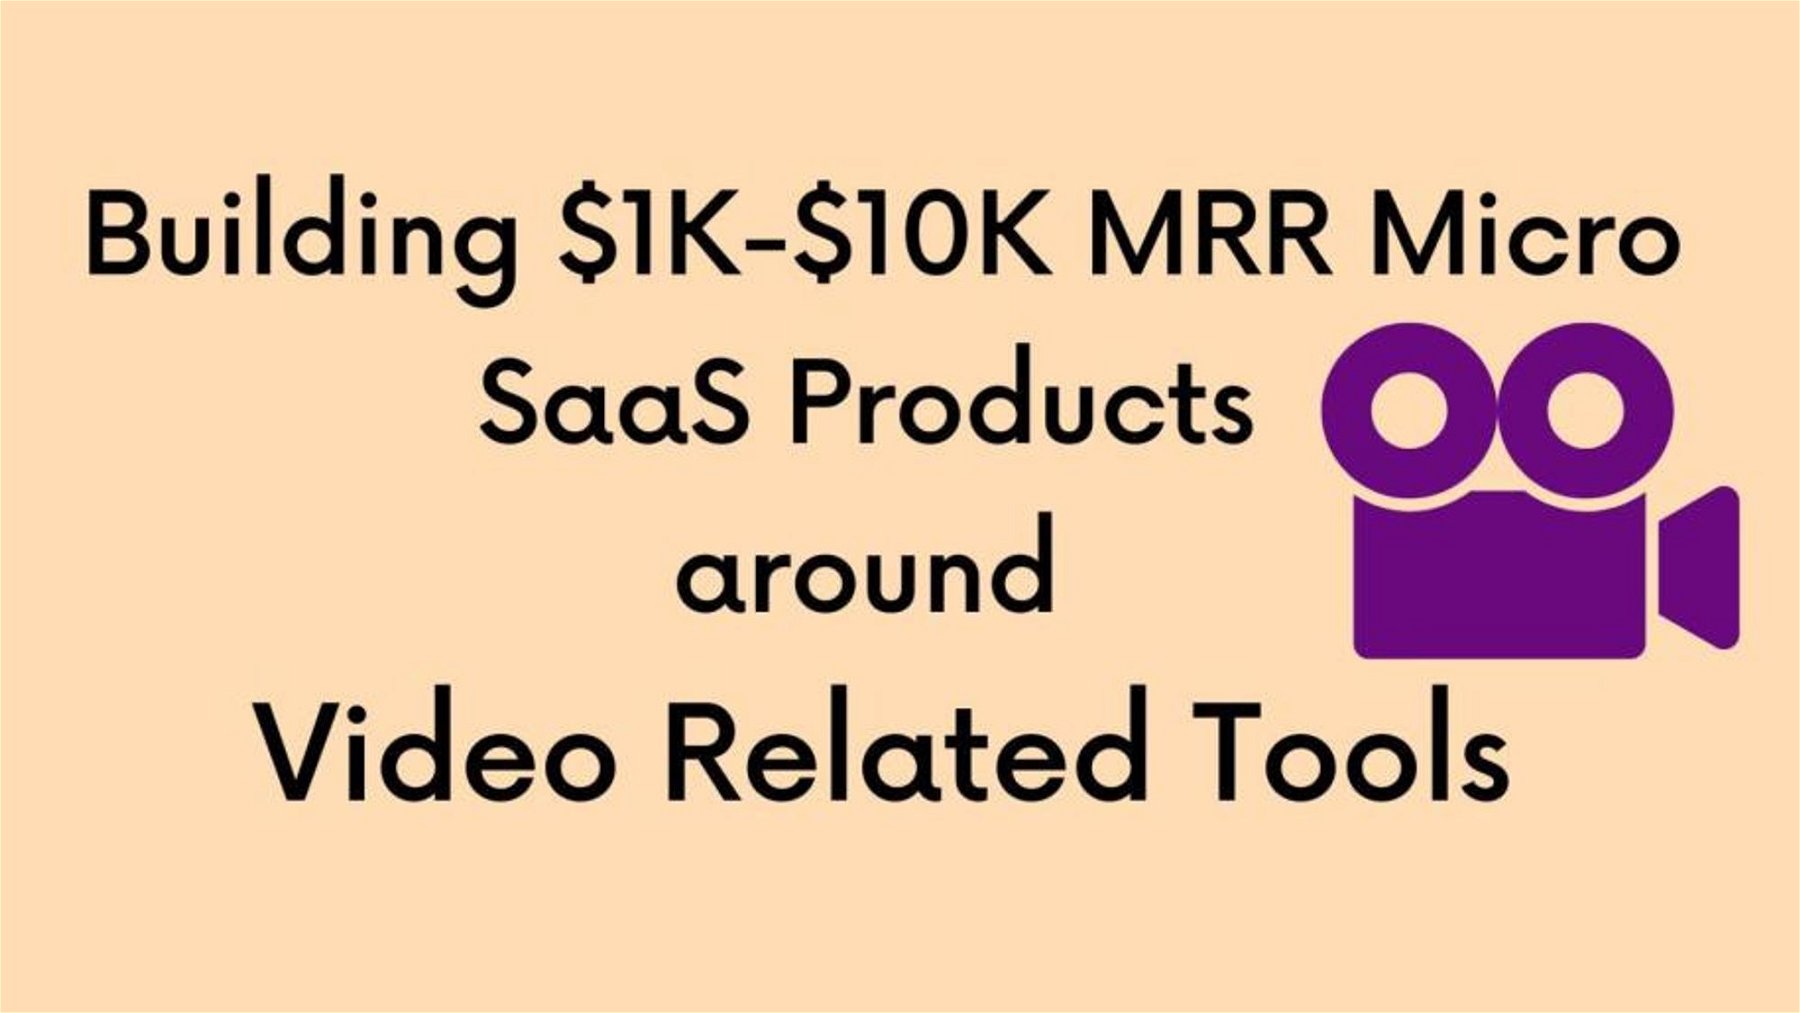 3 Ideas for Building $1K-$10K MRR Micro SaaS Products around Video Related Tools